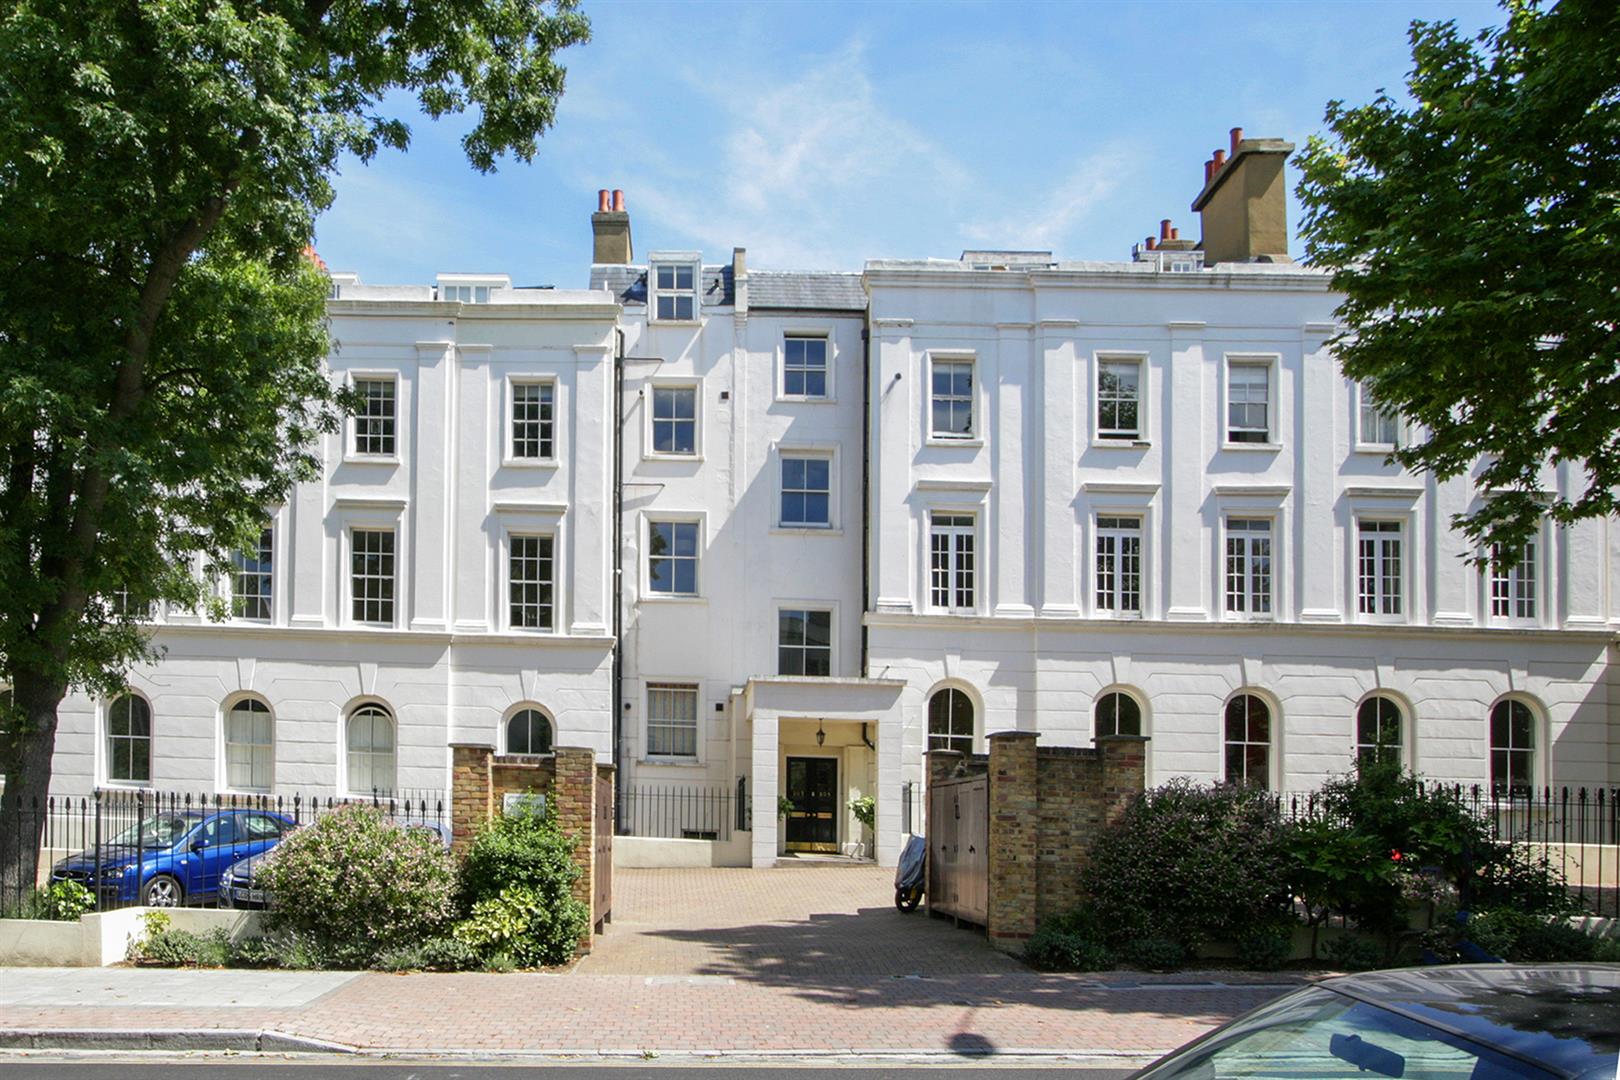 Flat - Conversion For Sale in Camberwell Grove, Camberwell, SE5 1020 view1